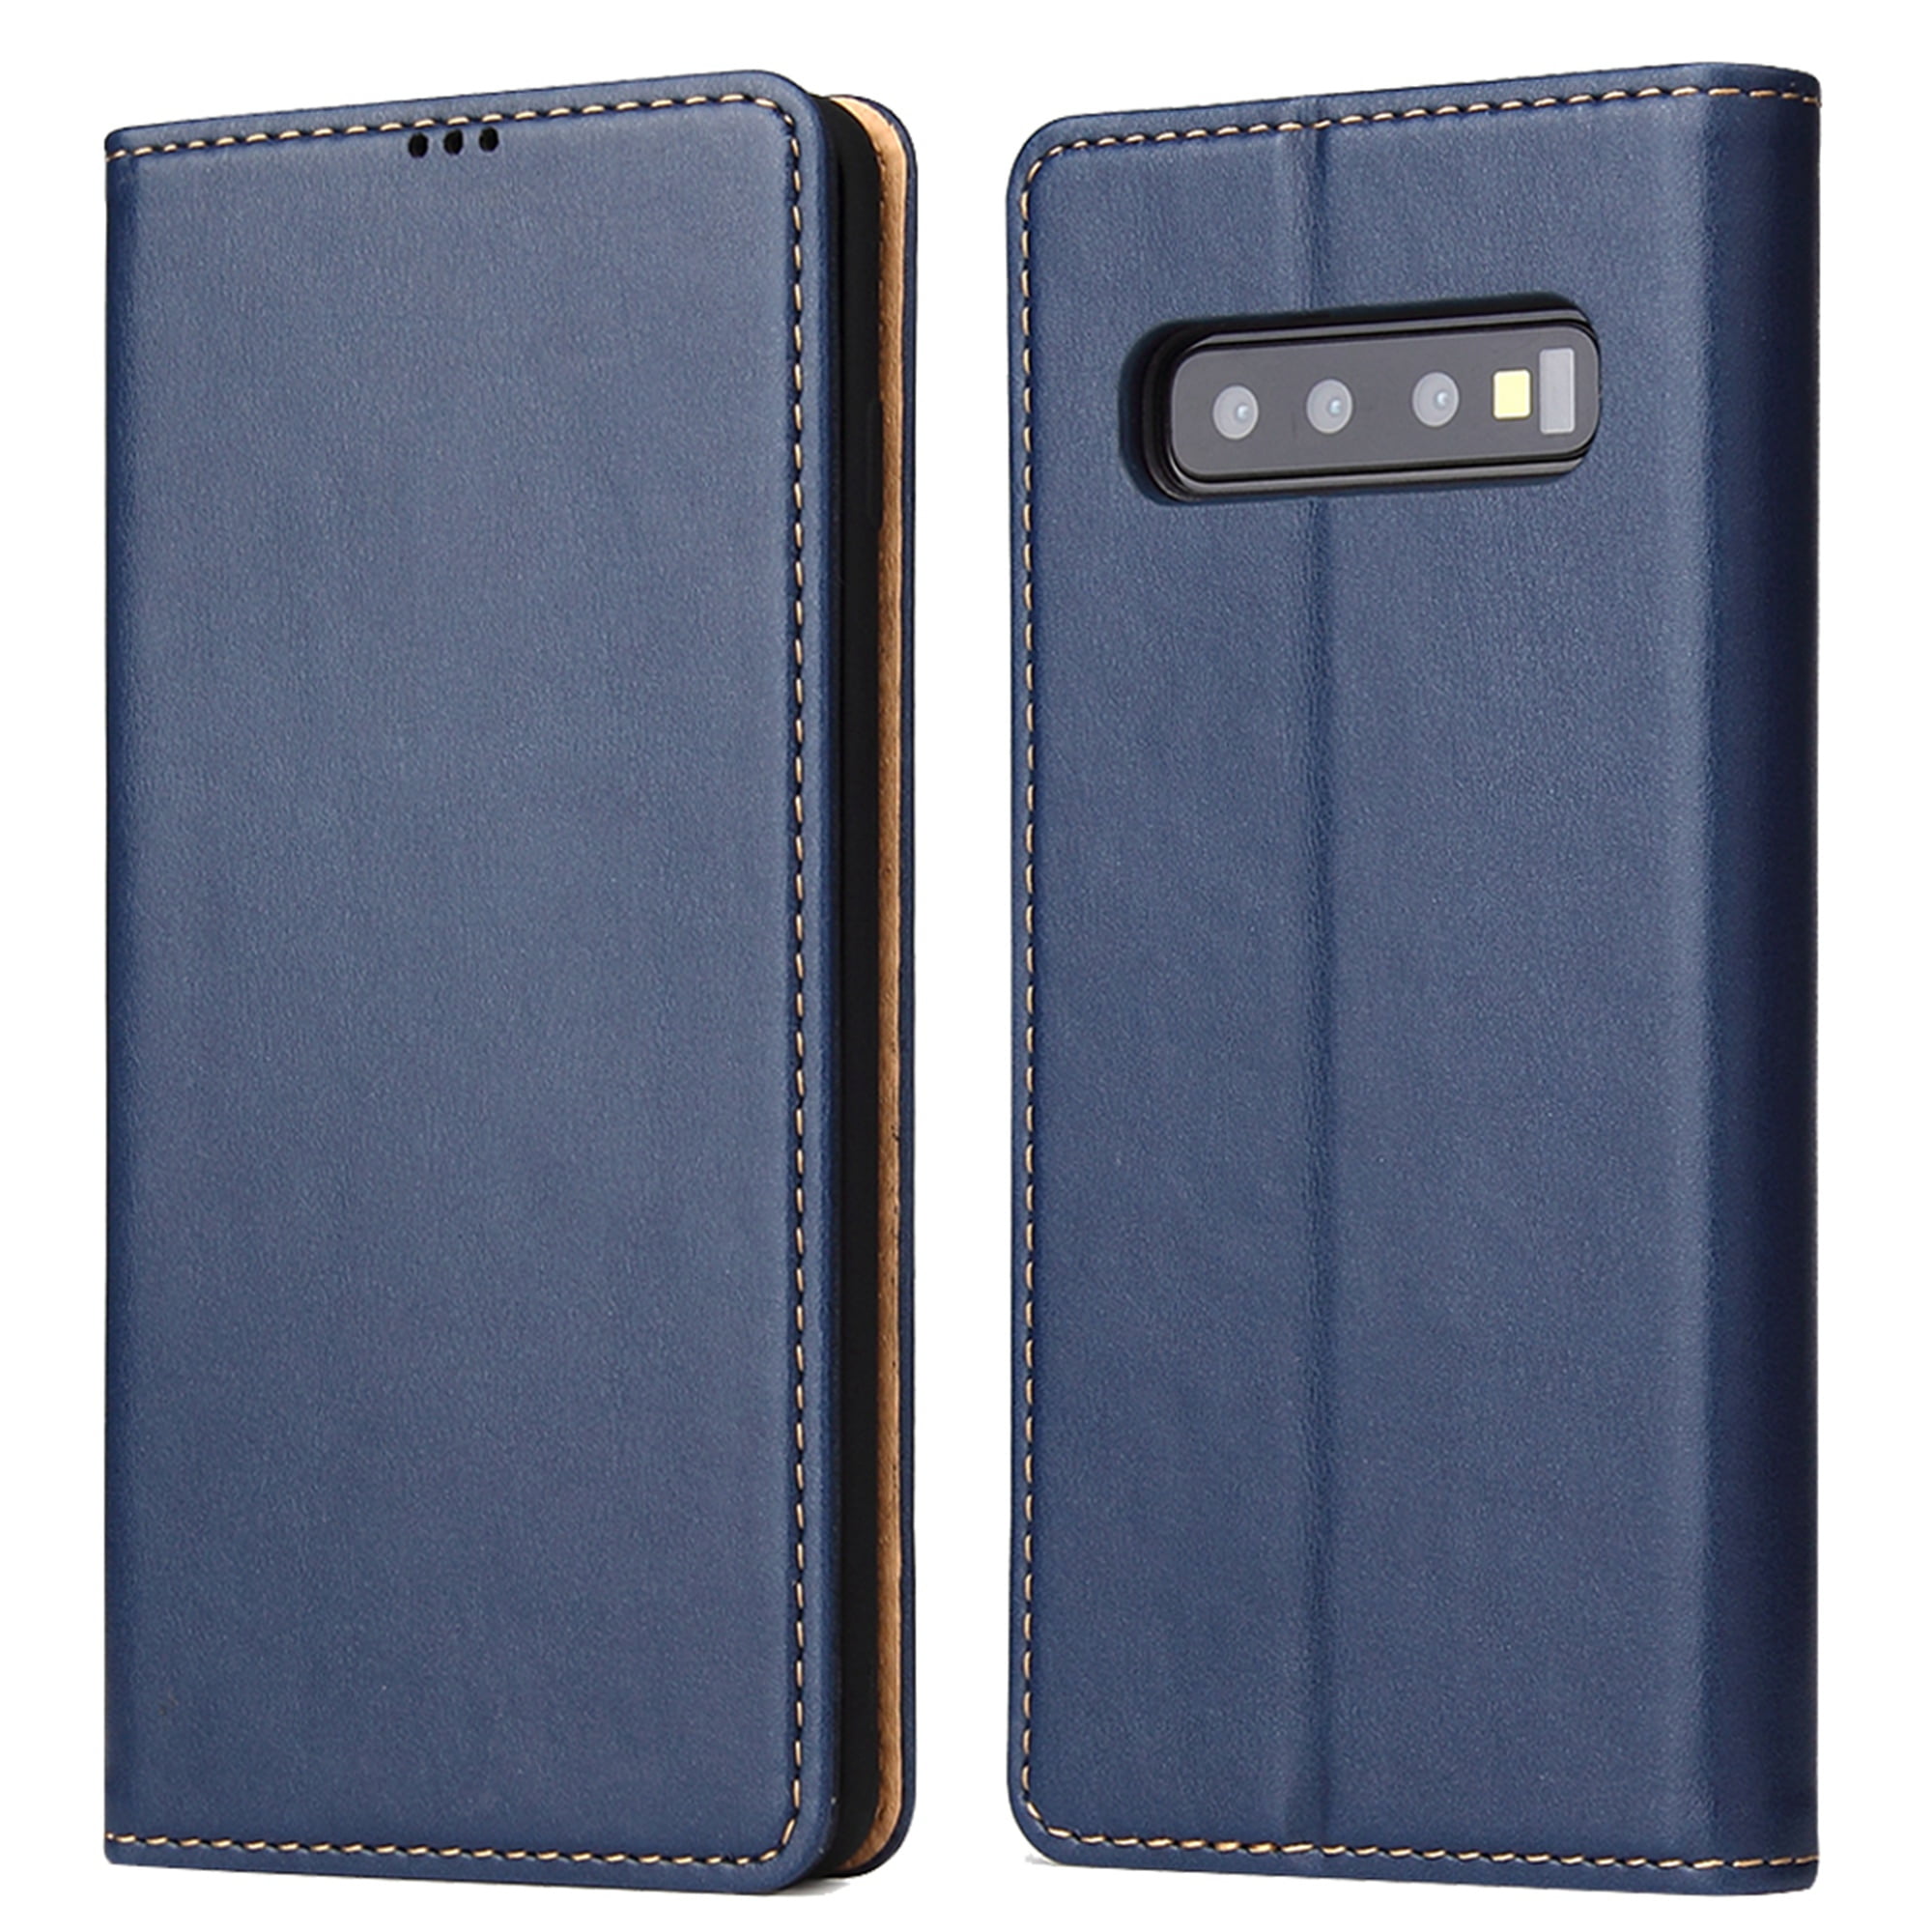 Rose Gold for Samsung Galaxy S10 Case Honeach Sturdy Leather Wallet Flip Case Magnetic Clasp with Cash Credit Card Slots Samsung S10 Case 6.1 Inch 